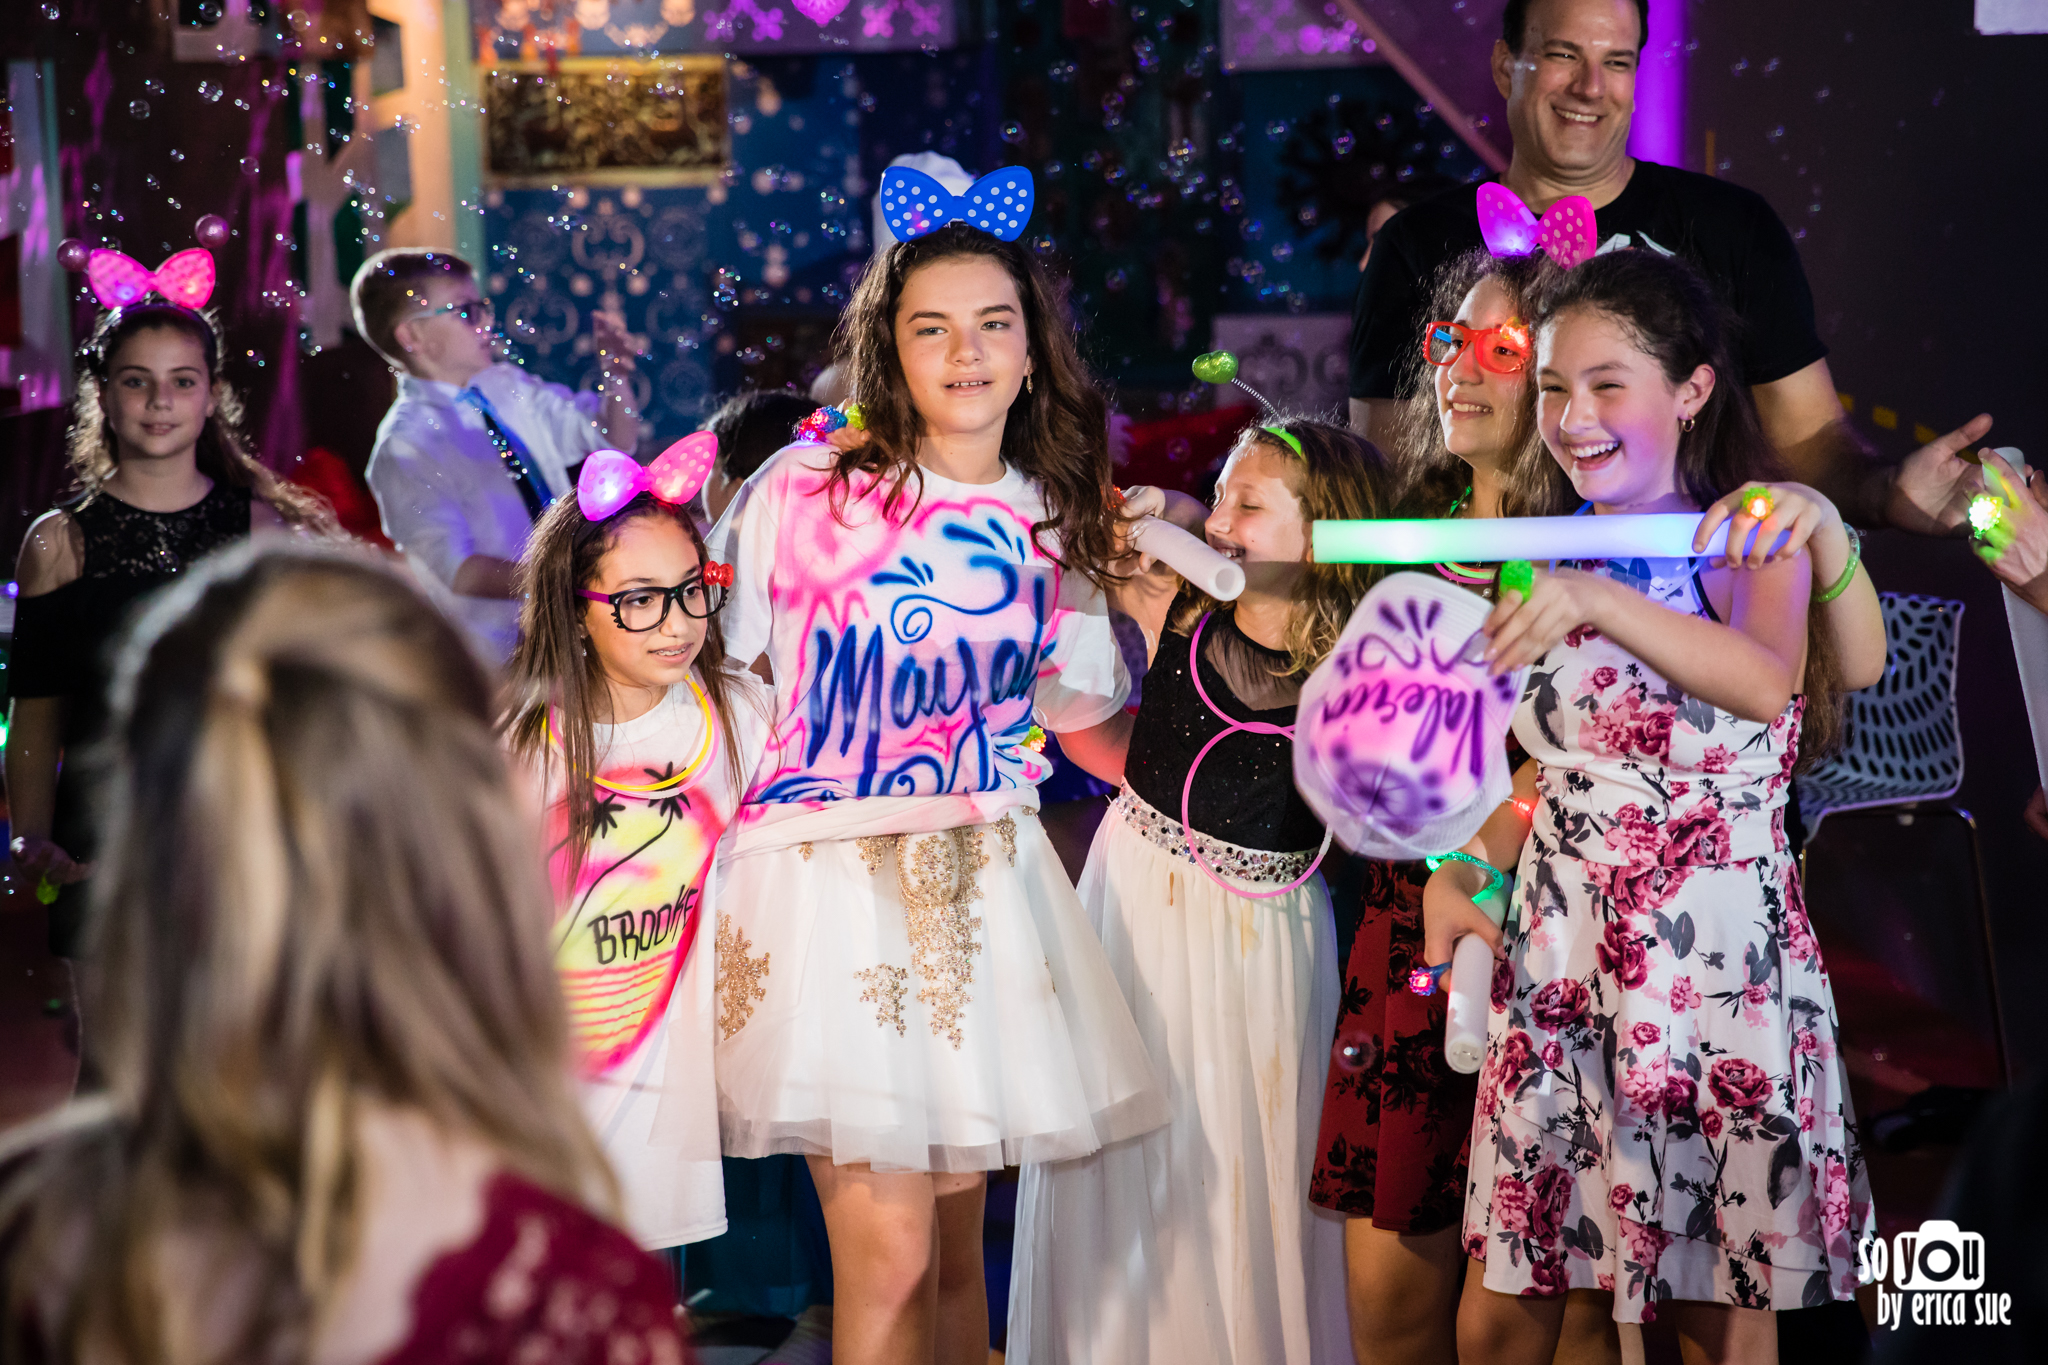 so-you-by-erica-sue-bar-bat-mitzvah-young-at-art-davie-fl-photography-6240.jpg